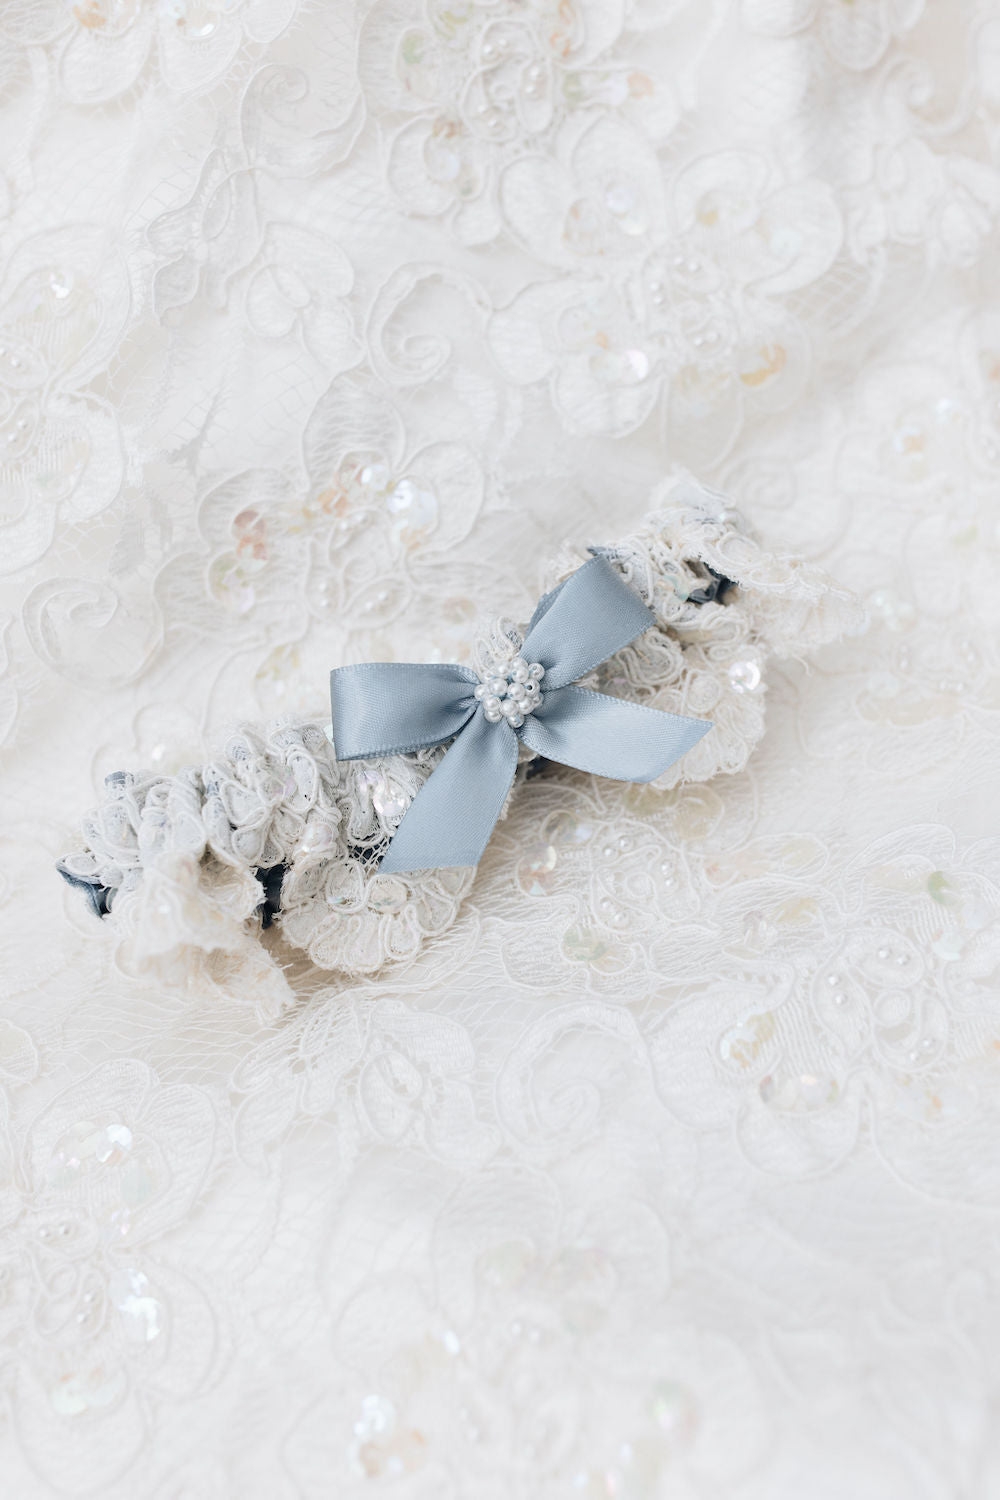 wedding garter set with ivory lace, blue satin & bow, and pearls with personalized embroidery - a handmade wedding heirloom by The Garter Girl